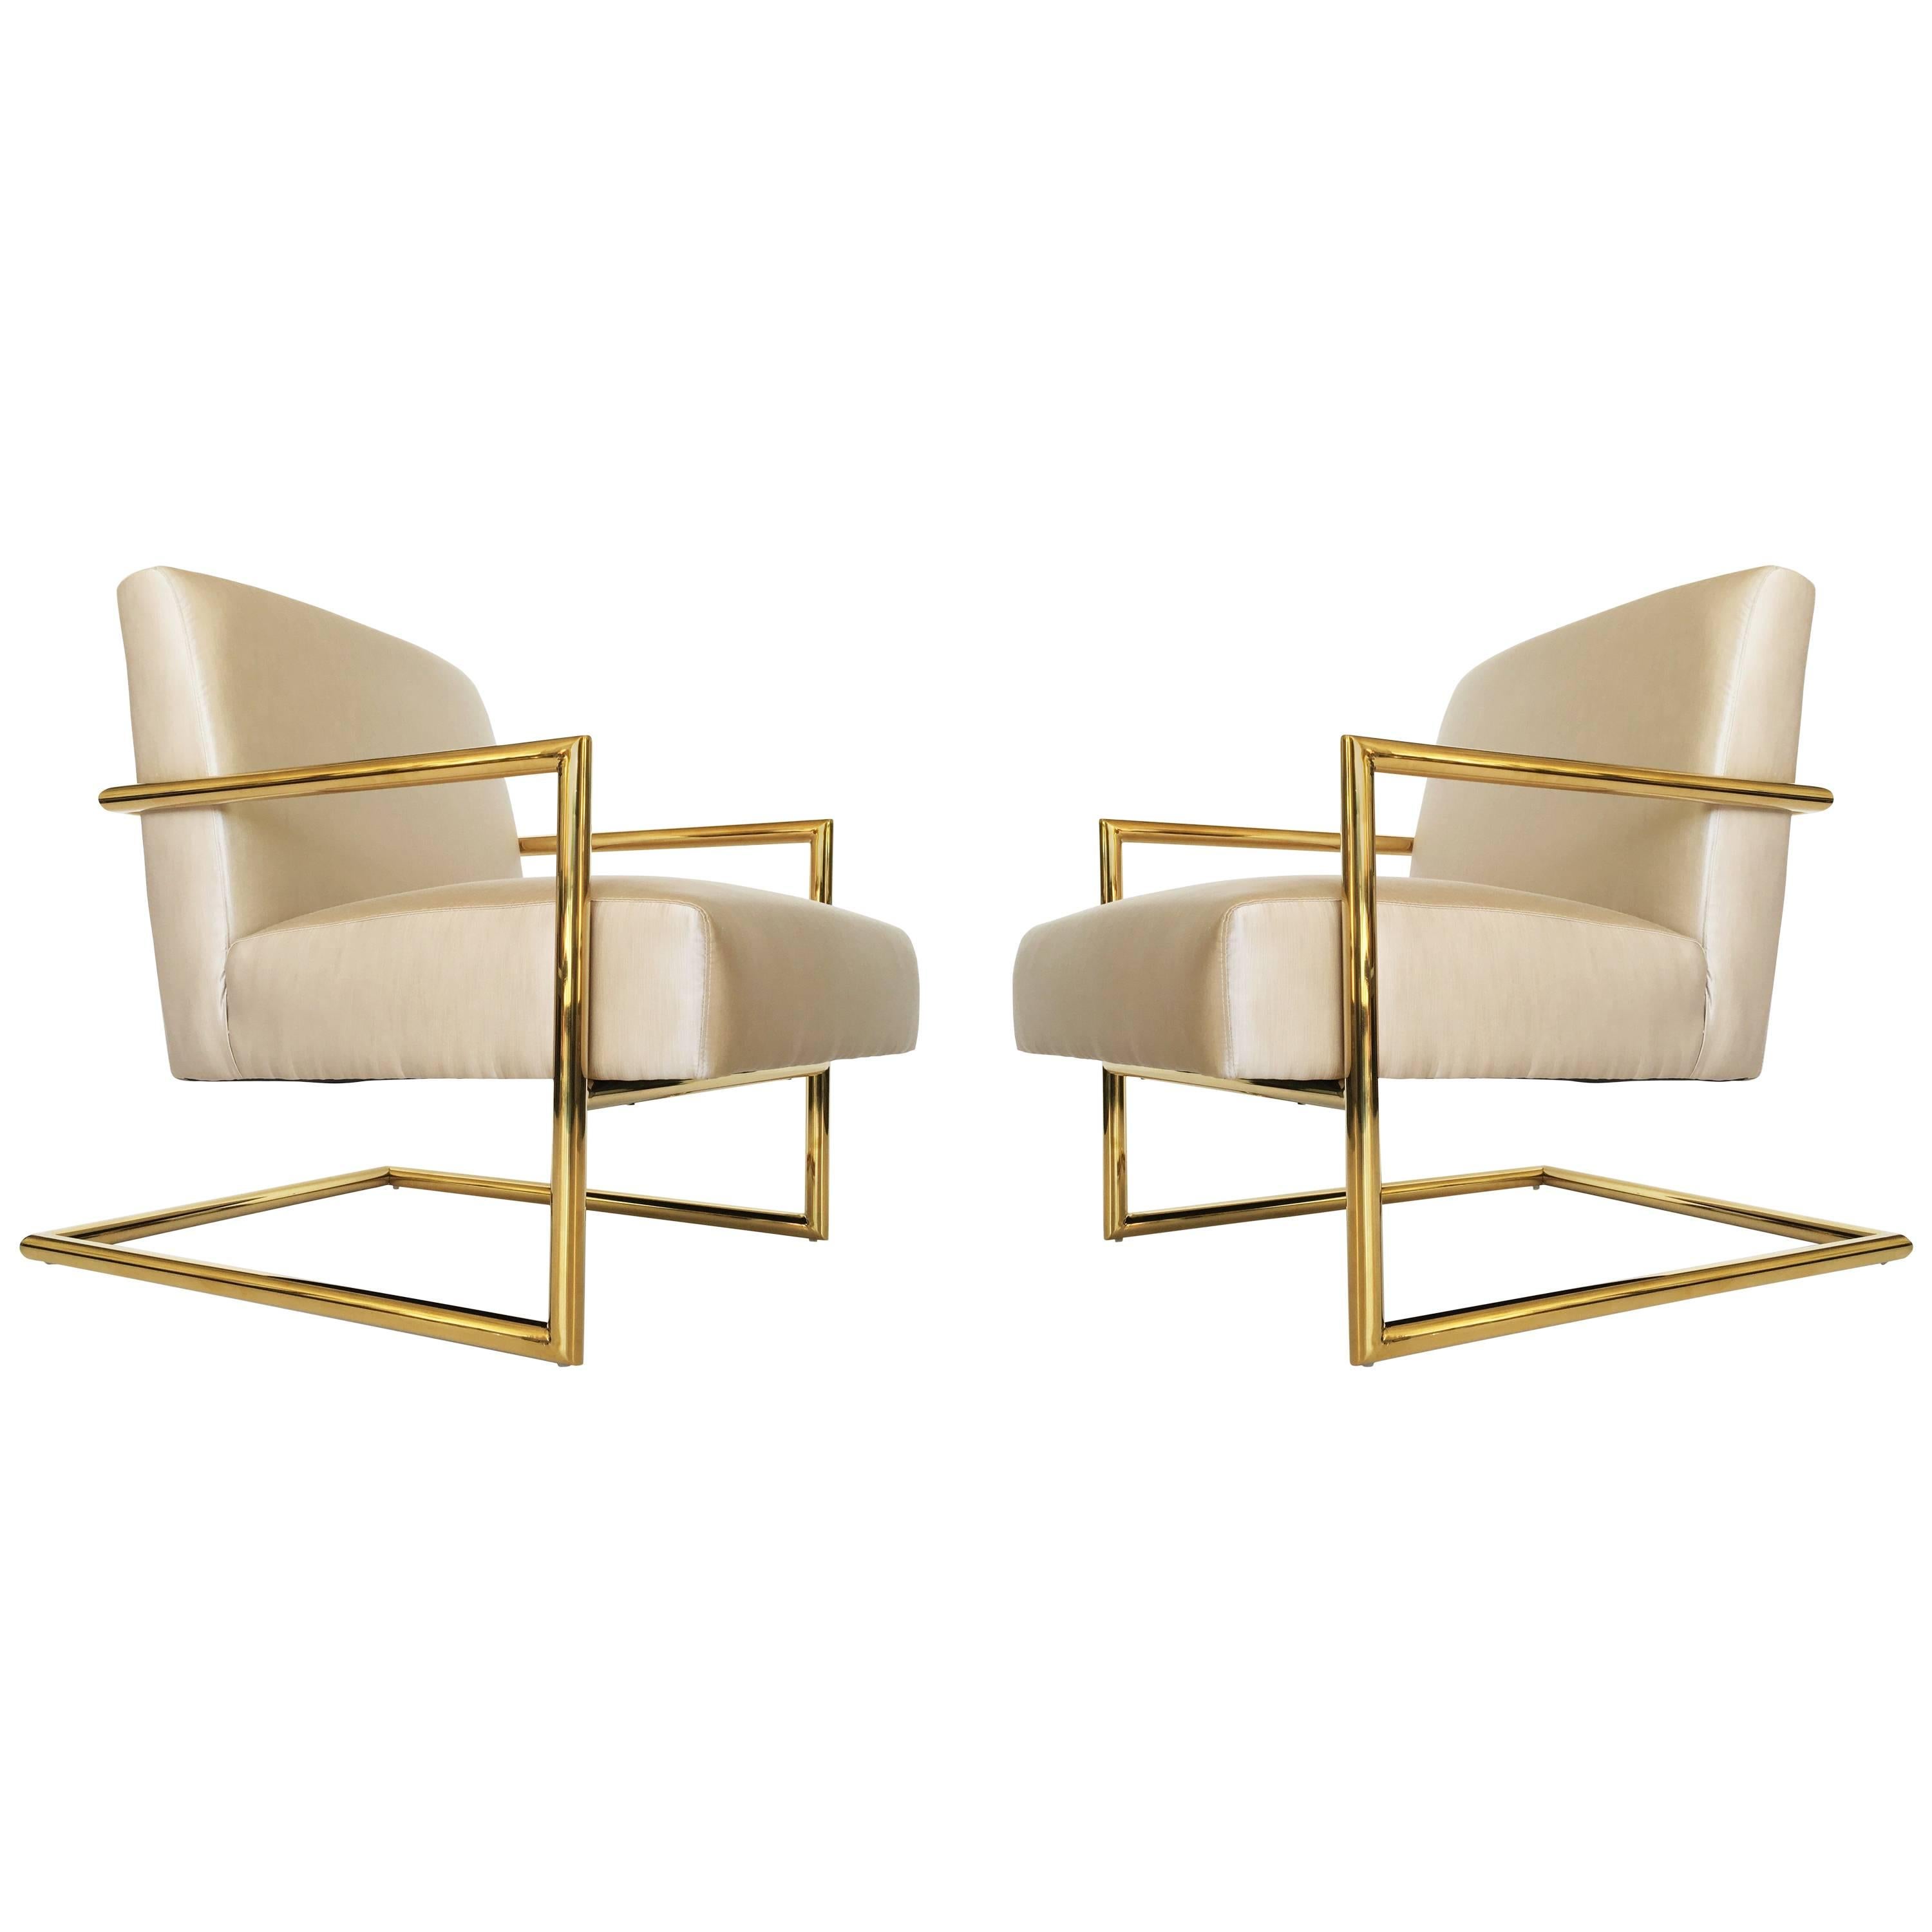 Tubular Brass Cantilevered Lounge Chairs, Milo Baughman Style For Sale